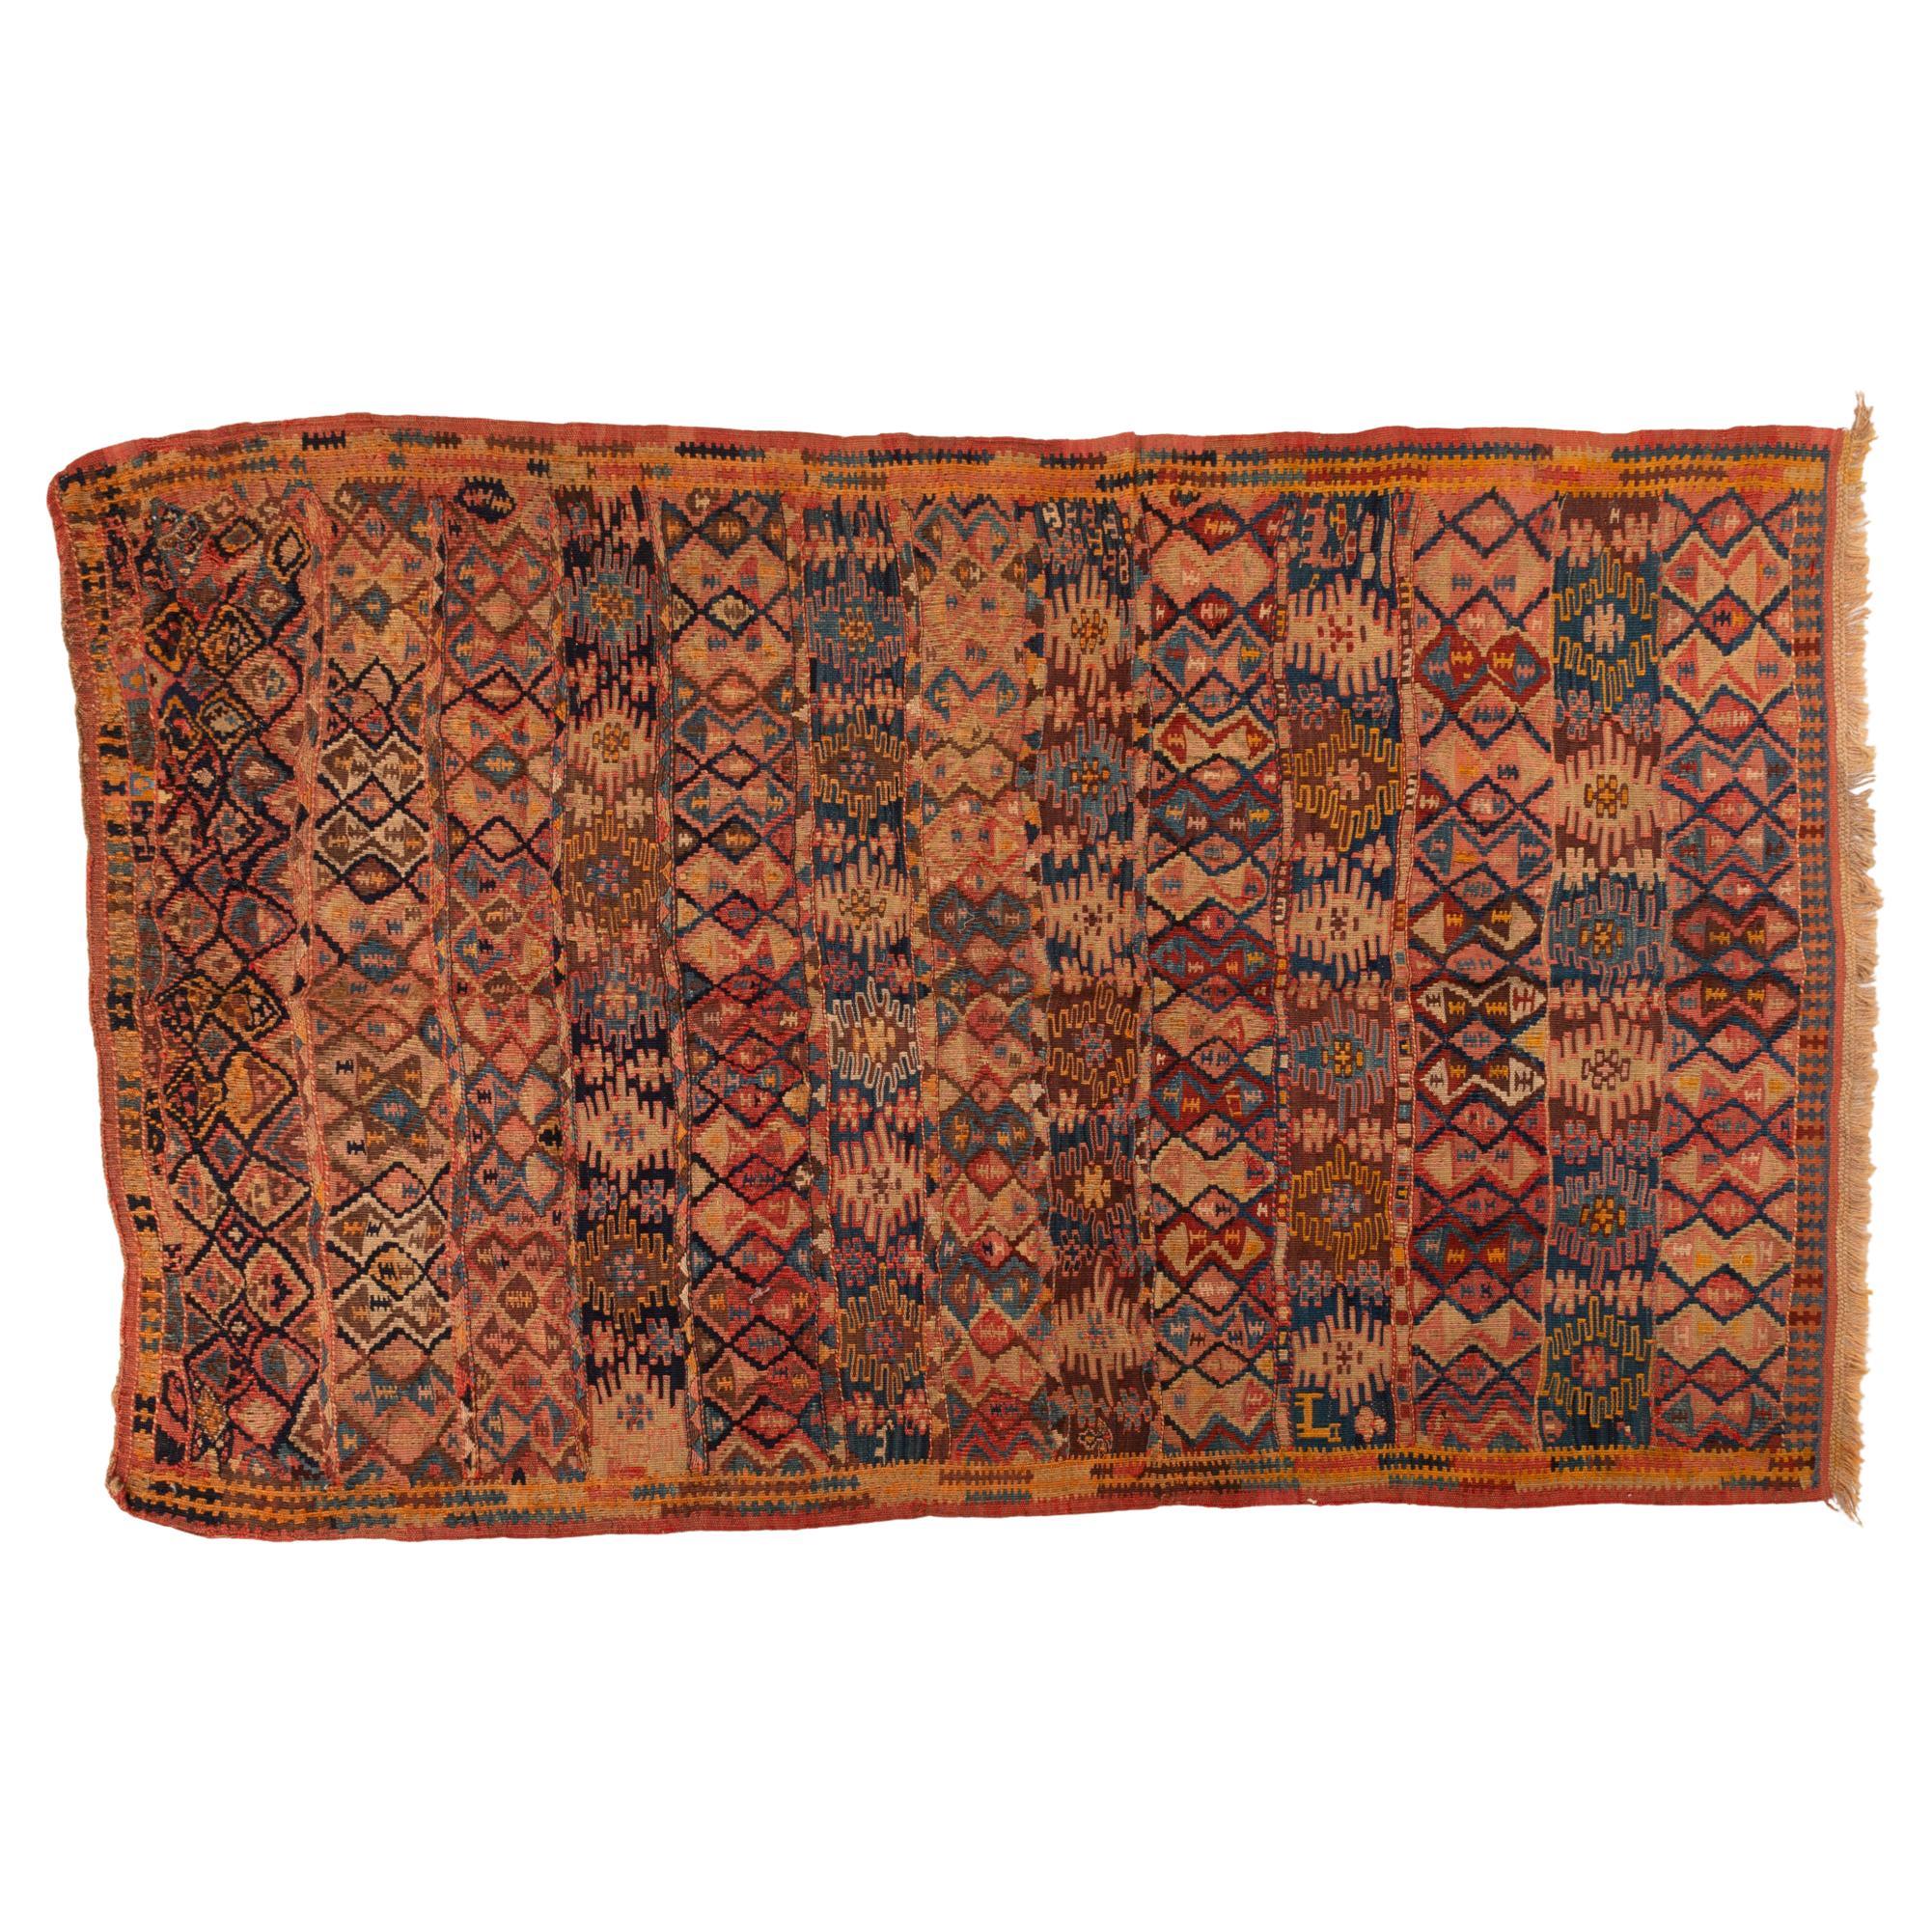 (n.740) - Old rare Kurdestan kilim from my private collection . complex workmanship, full of design and colors.
The photos don't make the real beauty of this work of art.